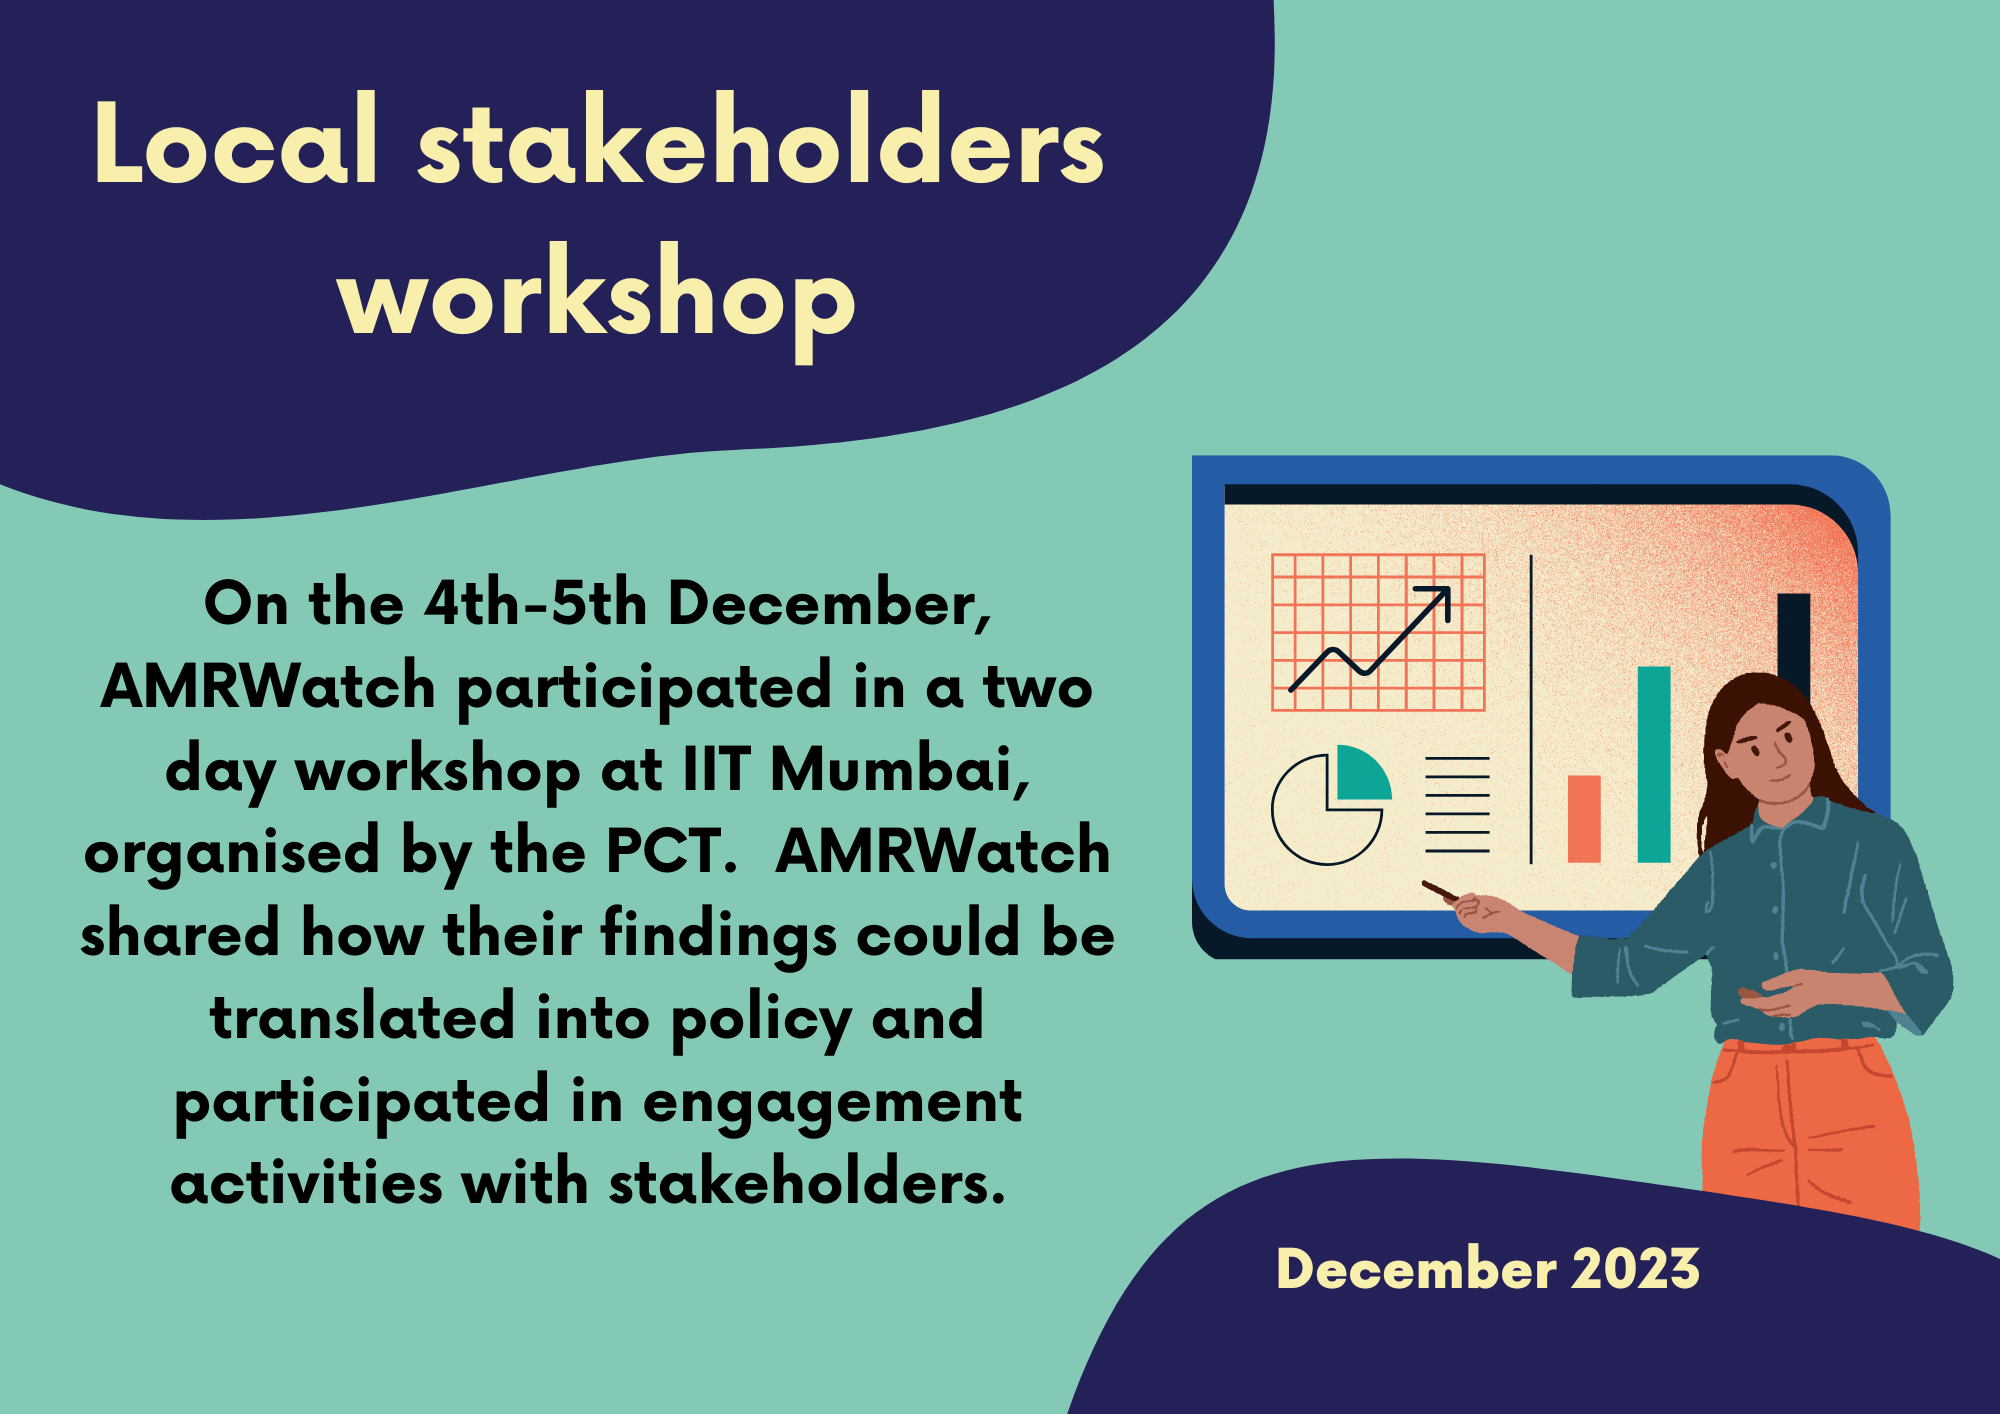 A colourful news graphic titled 'Local stakeholders workshop'. The text reads: On the 4th-5th December, AMRWatch participated in a two day workshop at IIT Mumbai, organised by the PCT.  AMRWatch shared how their findings could be translated into policy and participated in engagement activities with stakeholders.